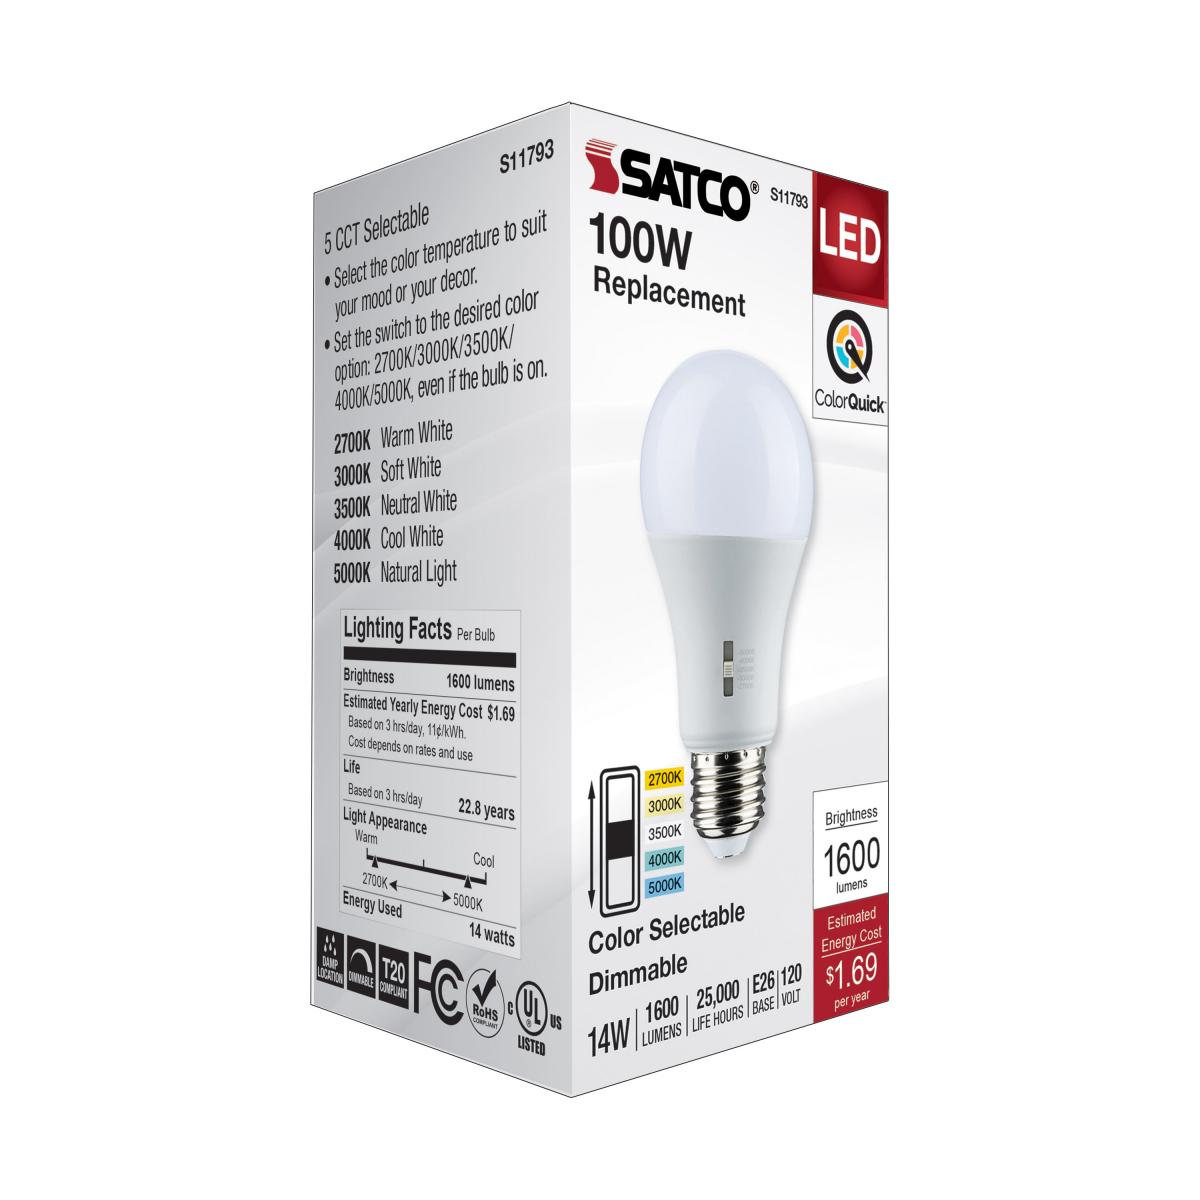 A19 LED Bulb, 100W Equivalent, 14 Watt, 1600 Lumens, Selectable CCT 2700K to 5000K, E26 Medium Base, Frosted Finish - Bees Lighting